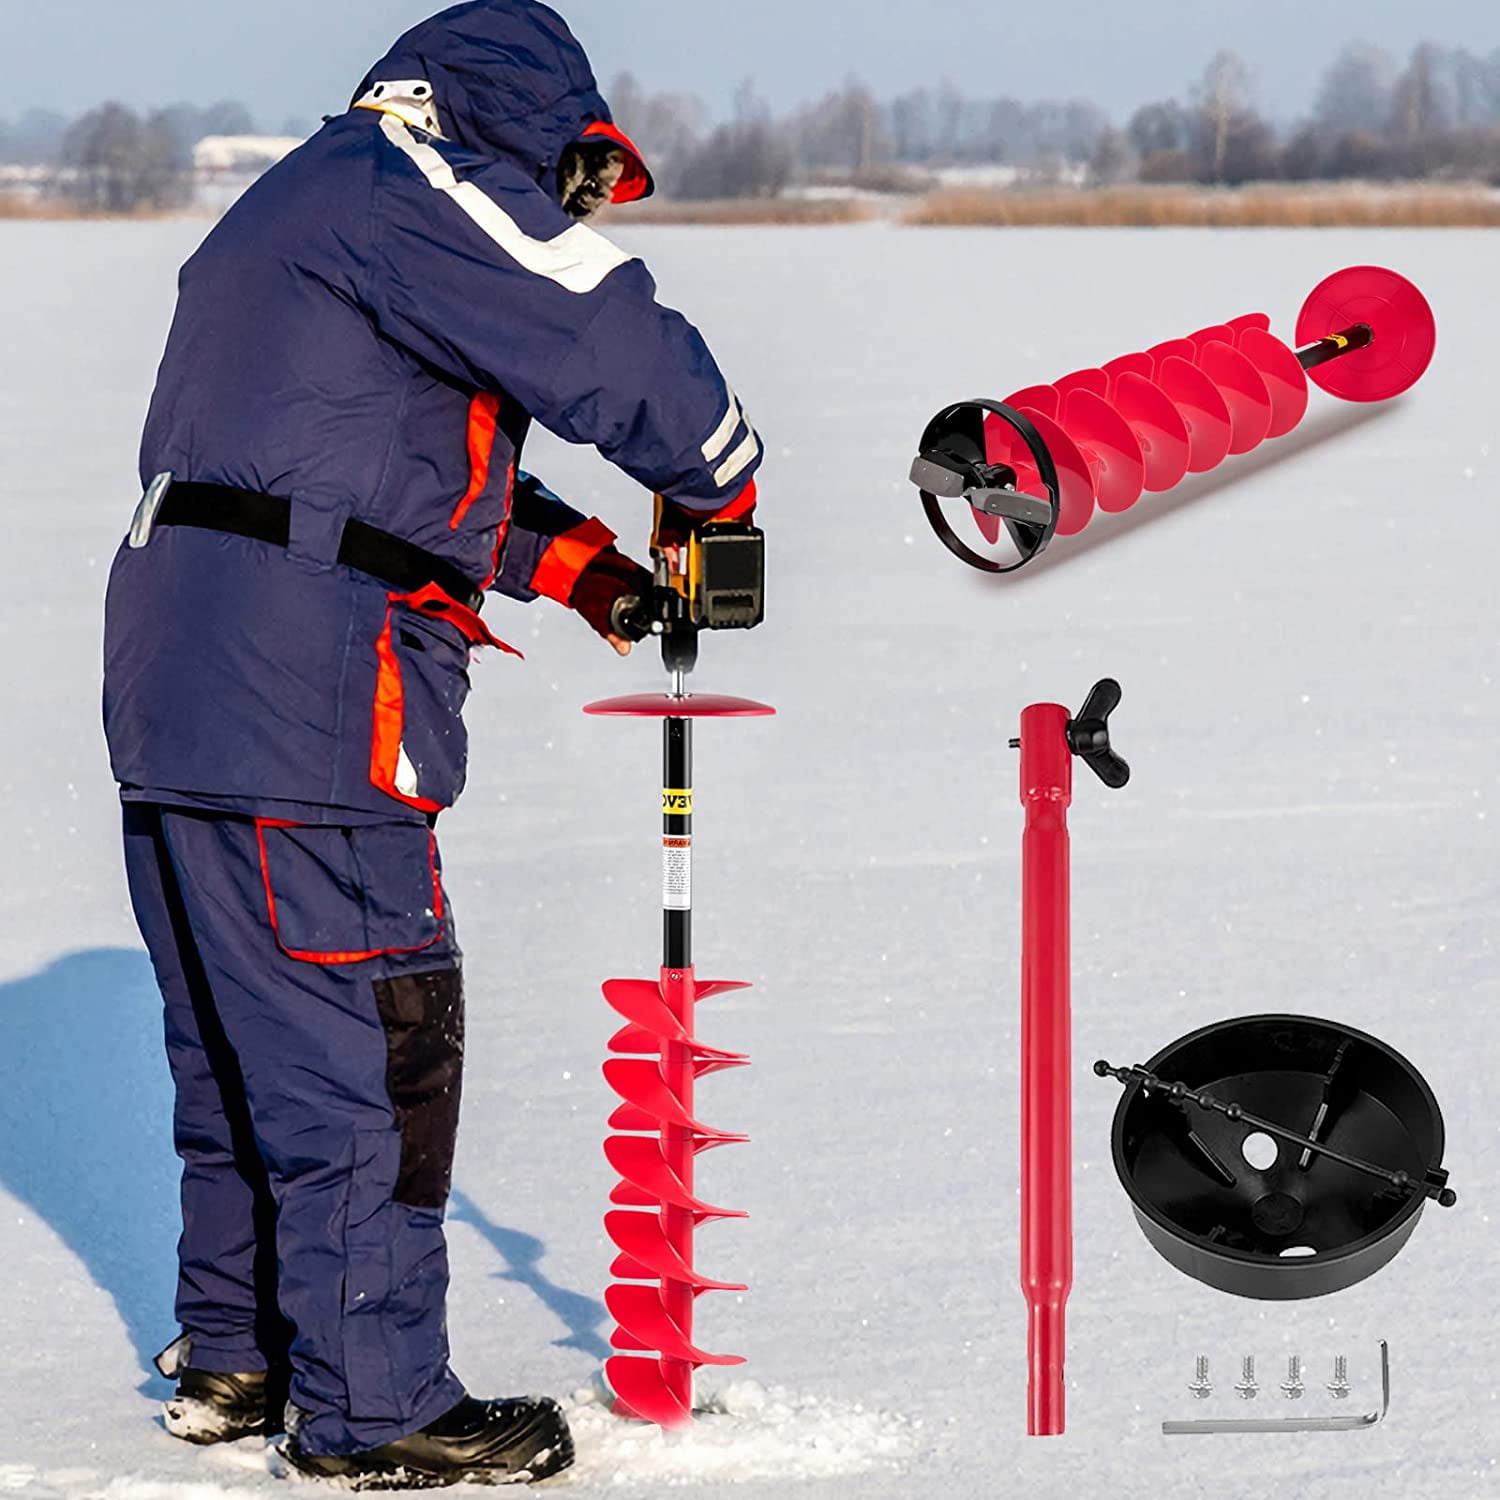 Eskimo Quantum 8-inch Ice Fishing Auger Bit, Includes Blade Protector and  8-inch Stainless Steel Blades, Red, QT8N 